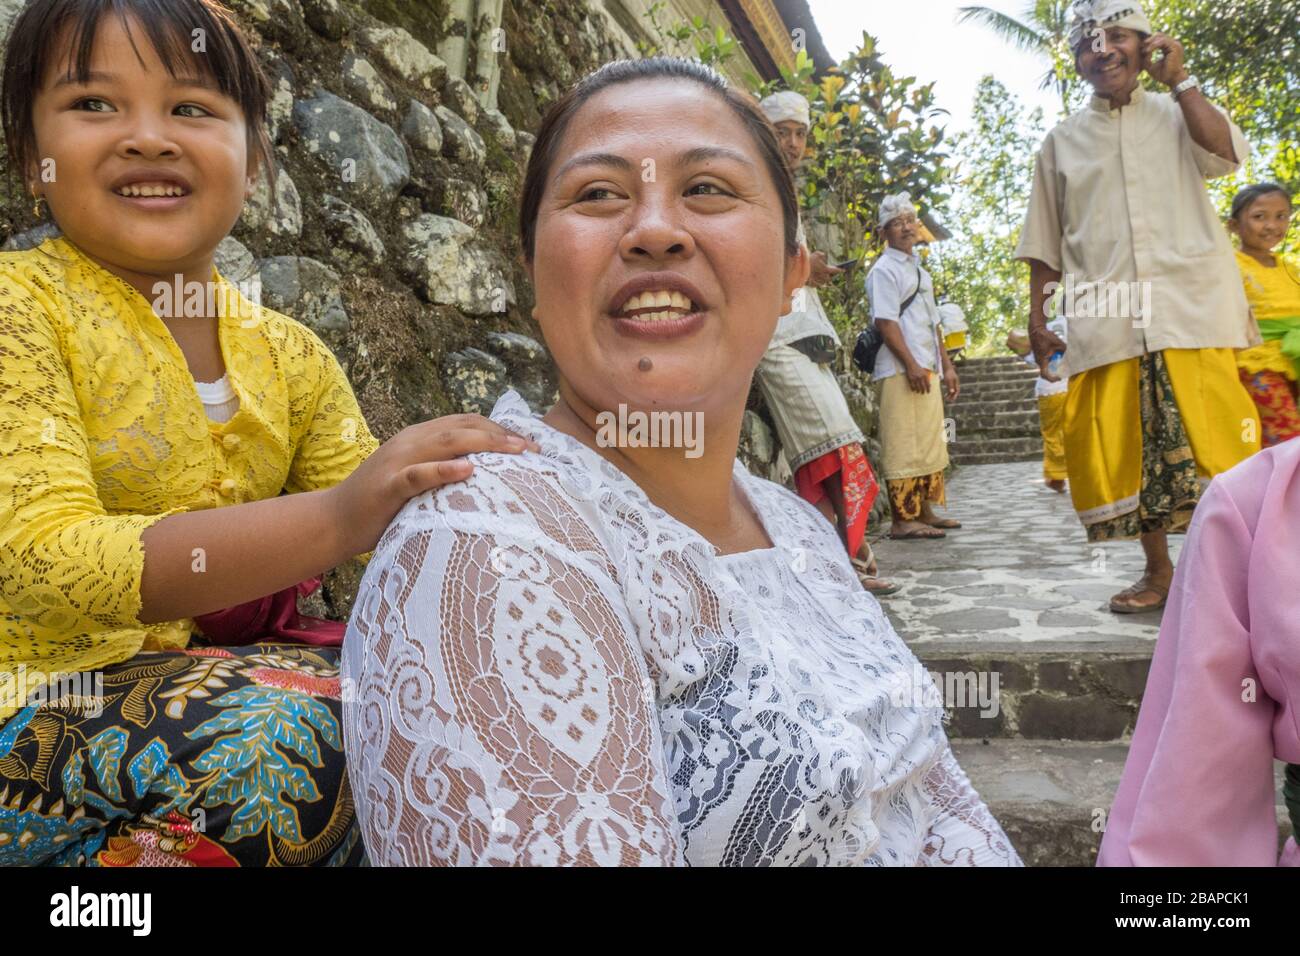 Balinese mother wearing white lace top, smiling, young daughter resting hand on her shoulder, sitting on temple wall with Father in background. Stock Photo